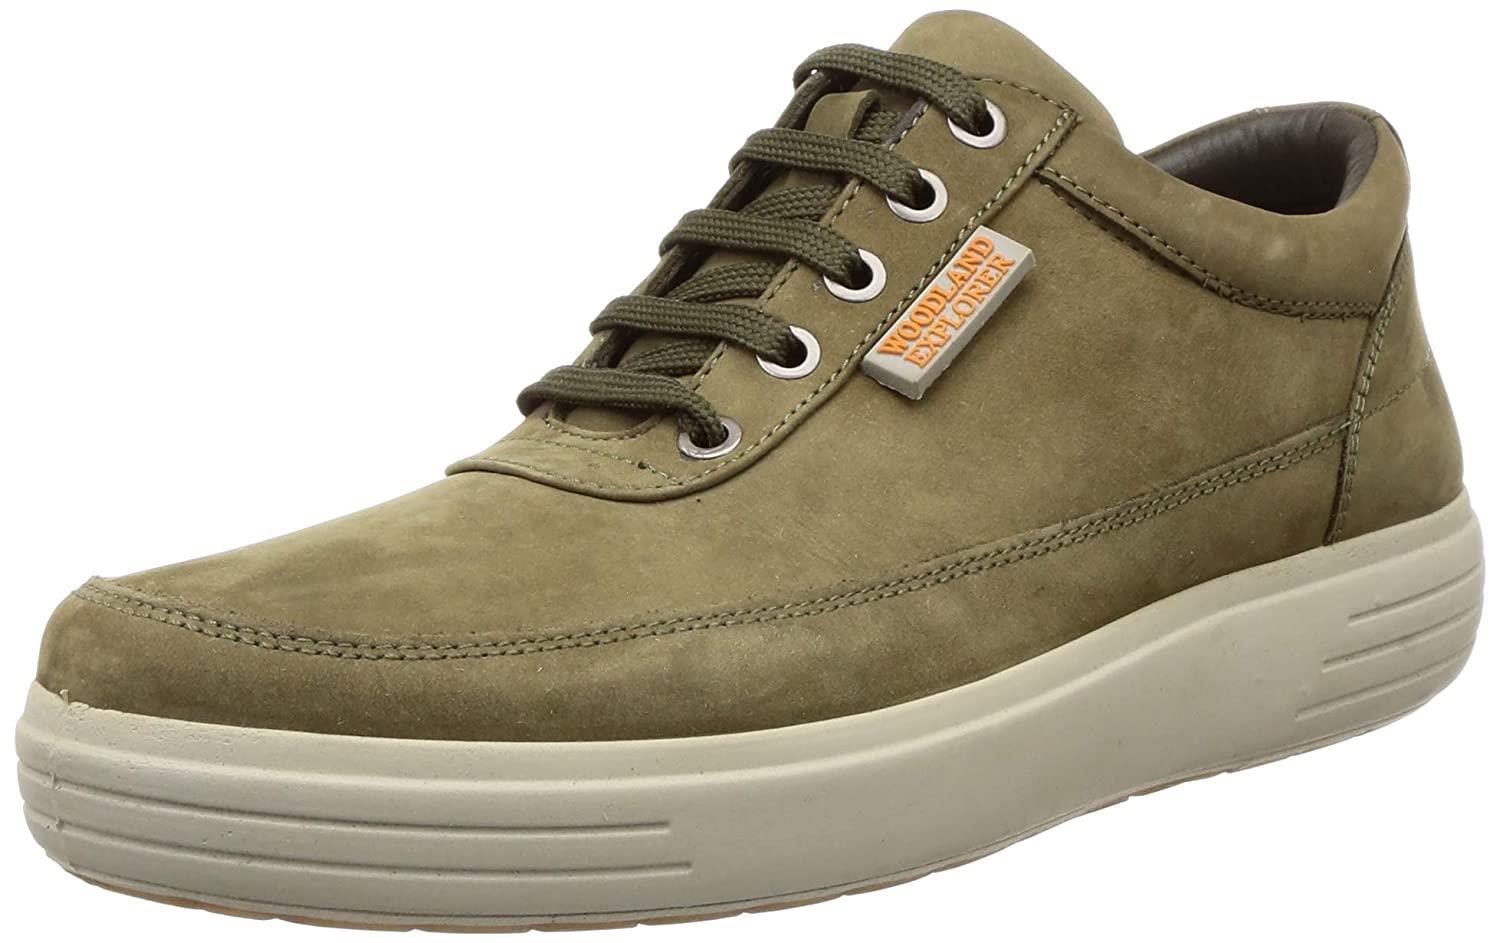 Buy Woodland Tobacco Brown Casual Sneakers for Men at Best Price @ Tata CLiQ